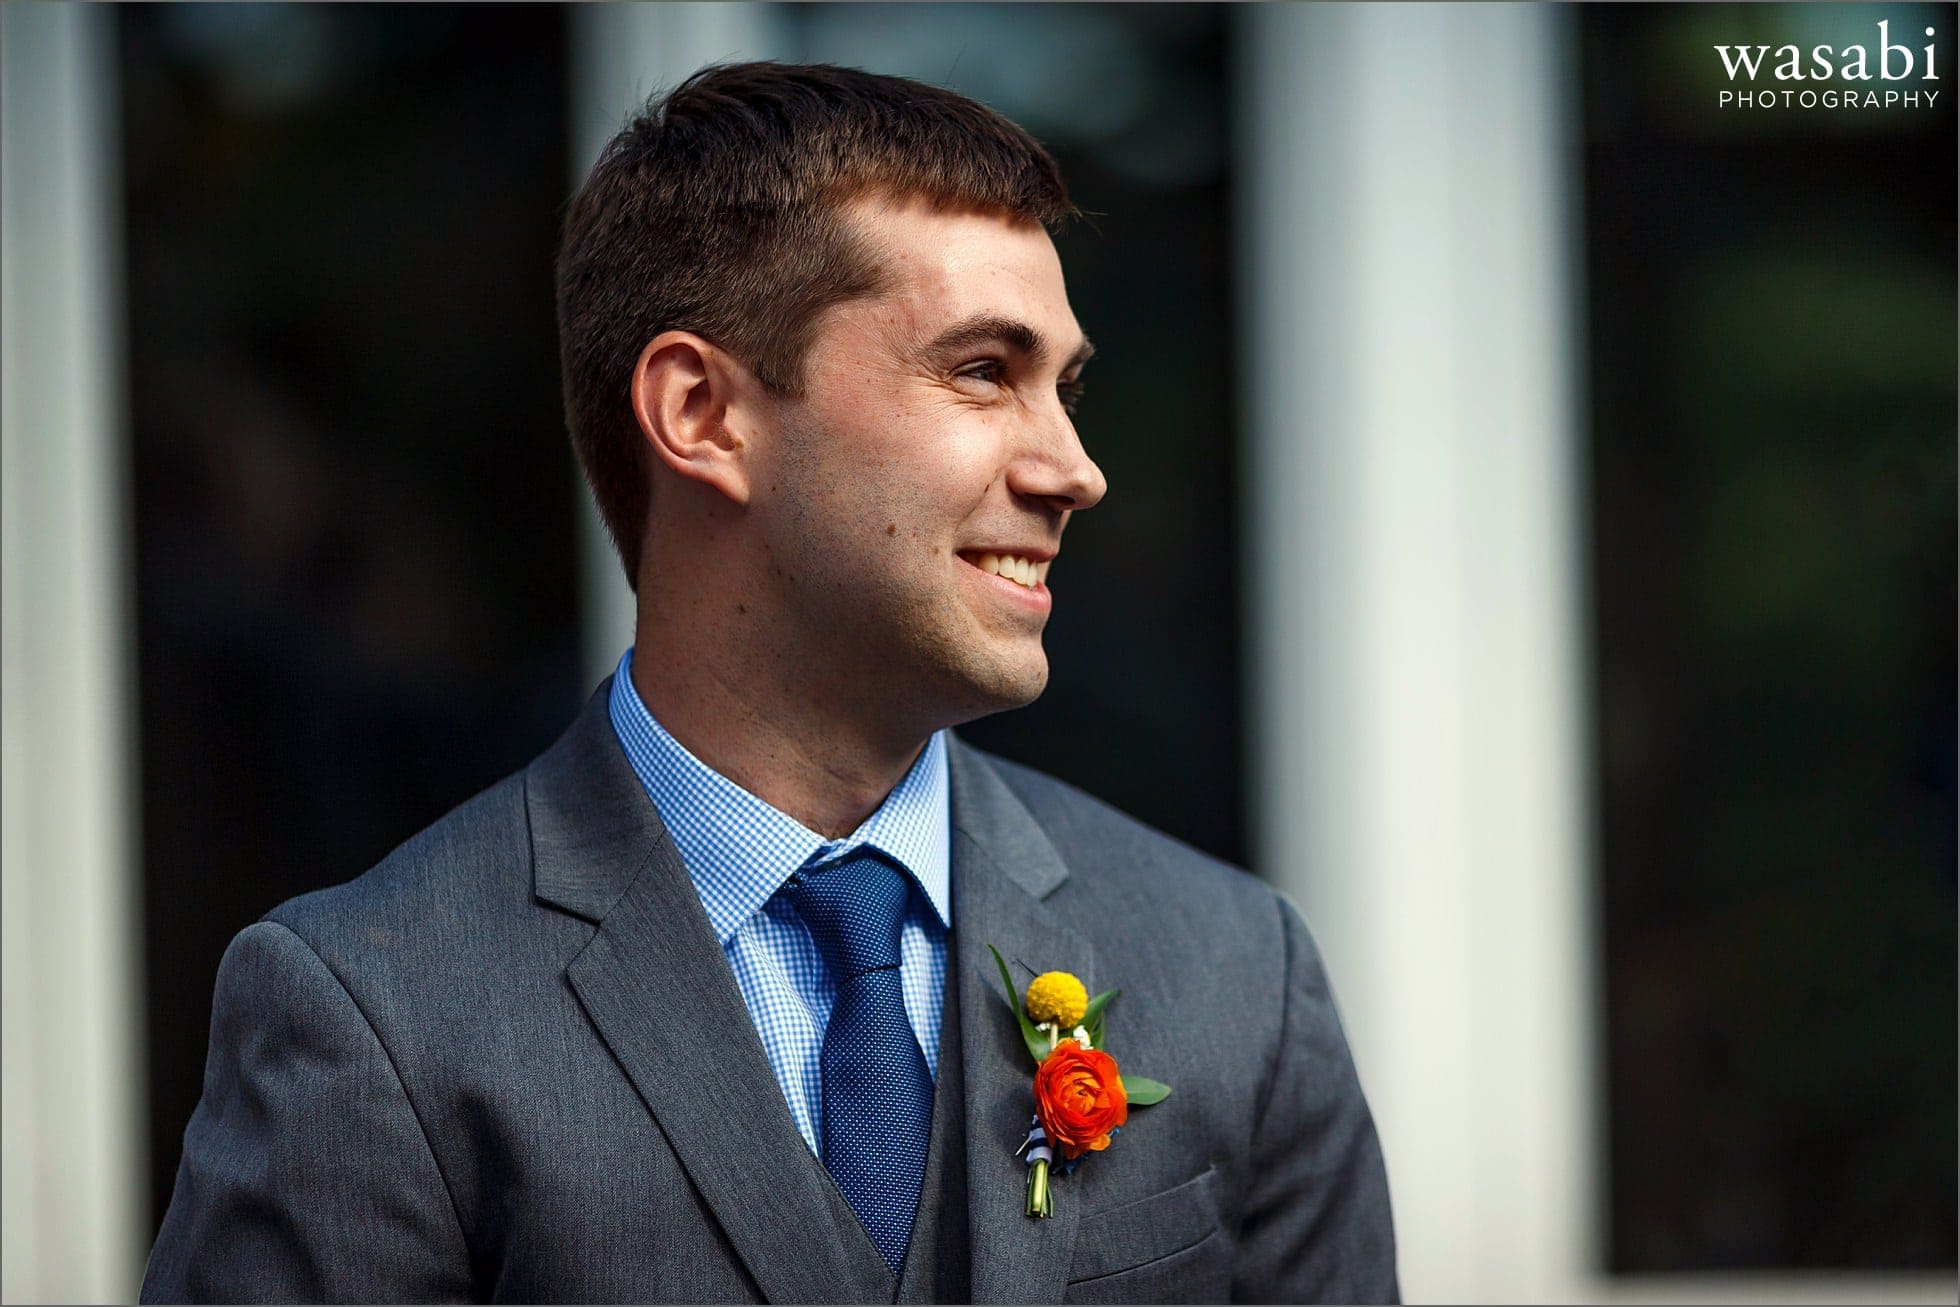 groom smiles at bride walking down the aisle during wedding ceremony at Oakhurst Country Club in Clarkston, Michigan